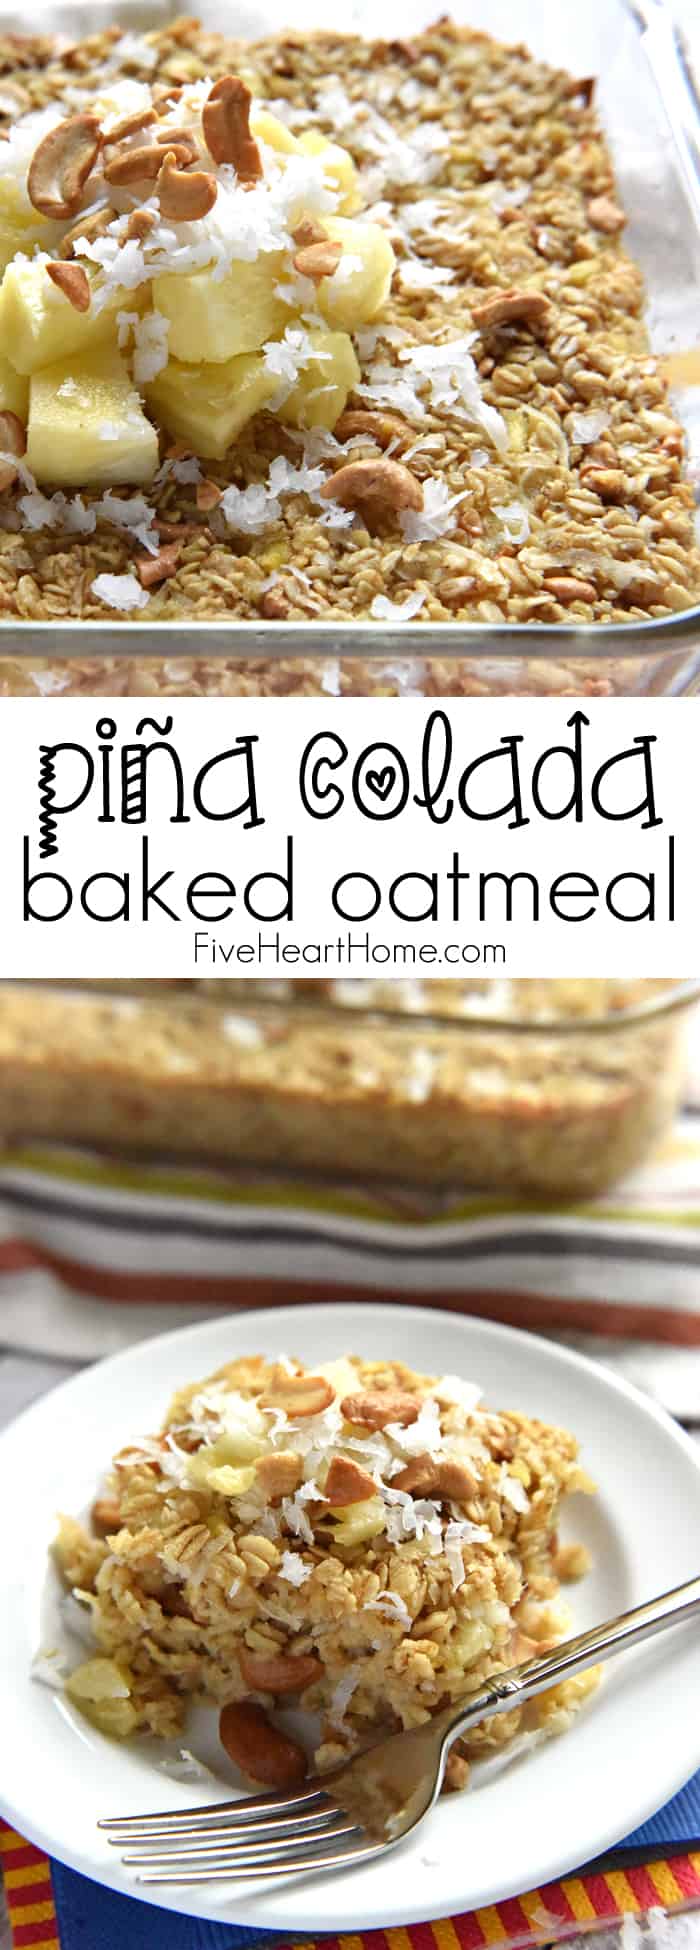 Piña Colada Baked Oatmeal ~ this wholesome breakfast recipe gets a tropical twist with the addition of fresh minced pineapple, coconut milk, and shredded coconut | FiveHeartHome.com via @fivehearthome